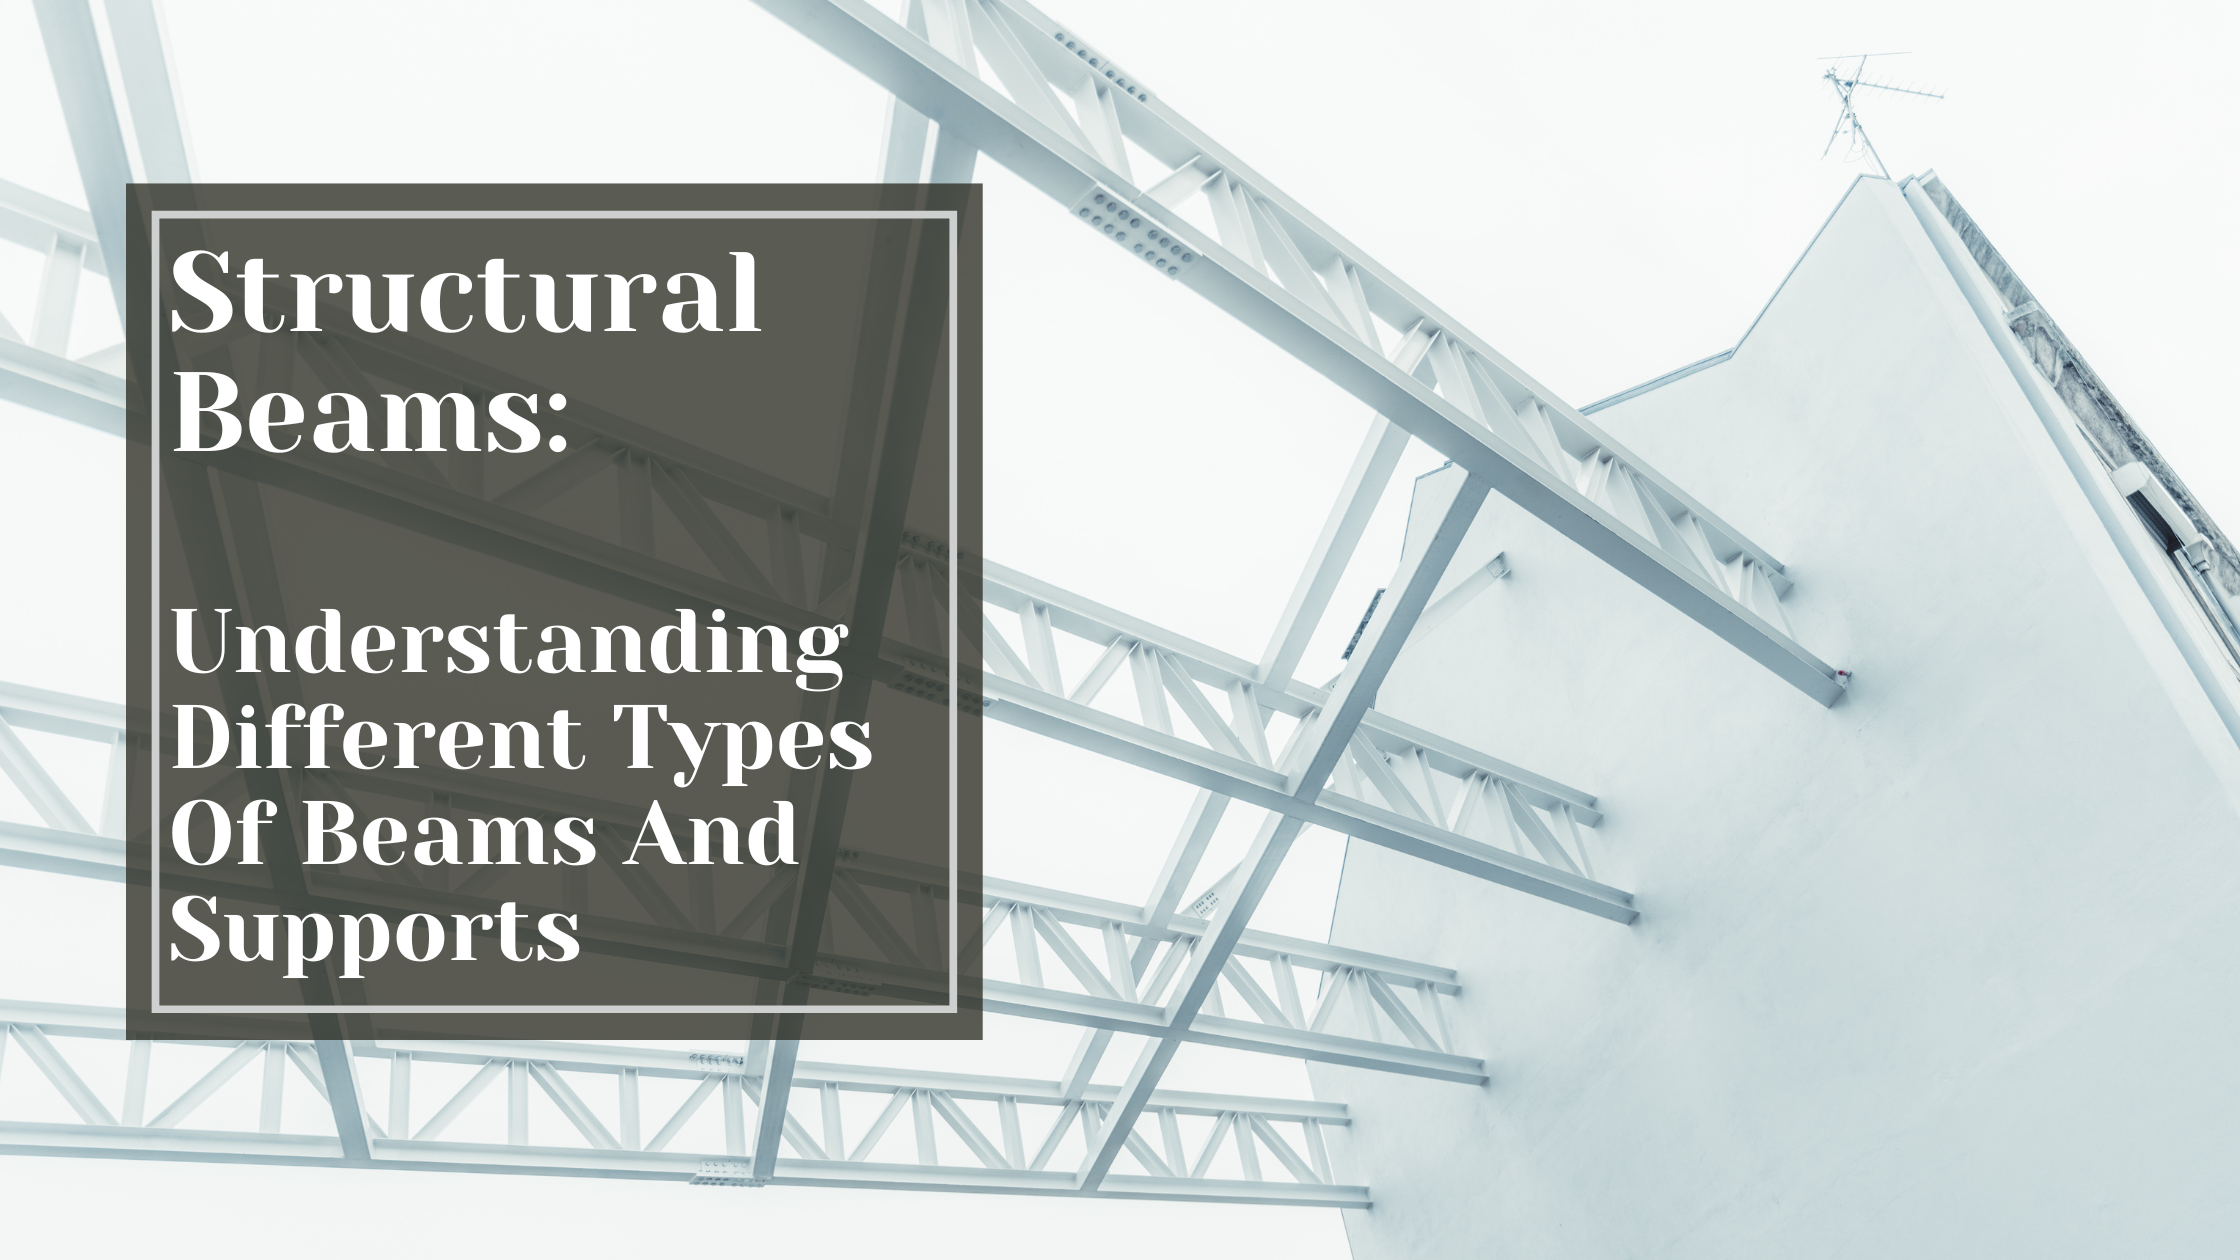 Structural Beams: Understanding Different Types Of Beams And Supports